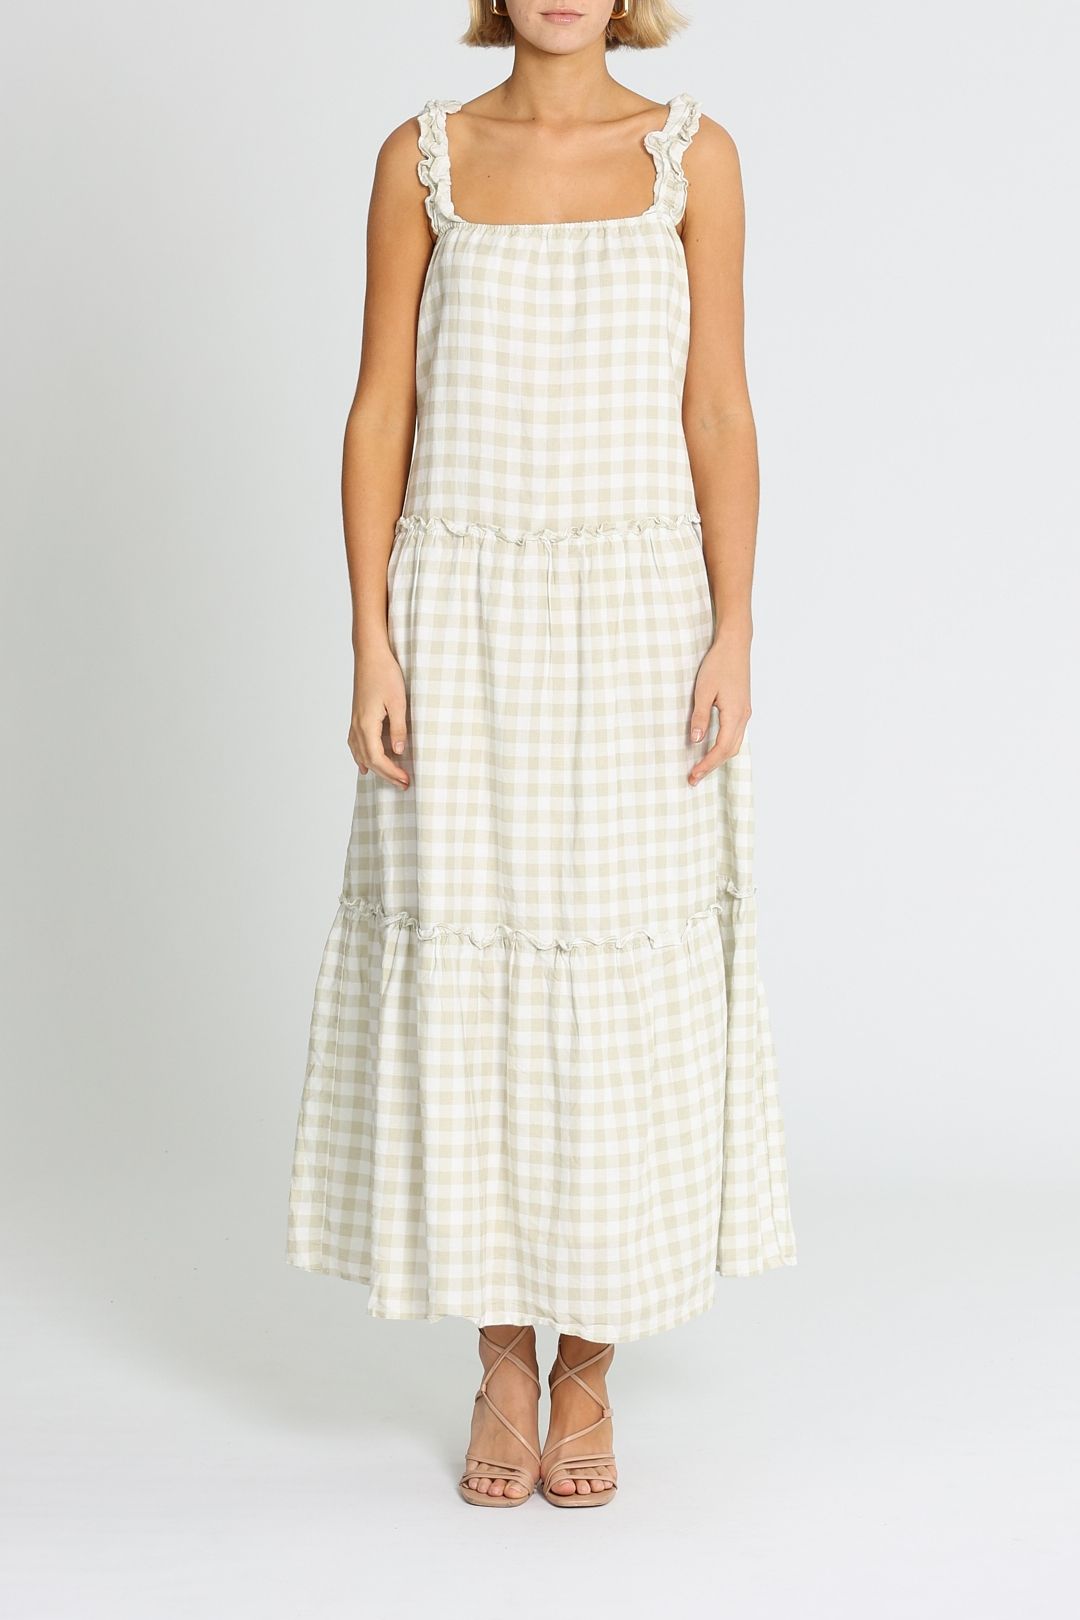 Charlie Holiday Lottie Gingham Maxi Dress